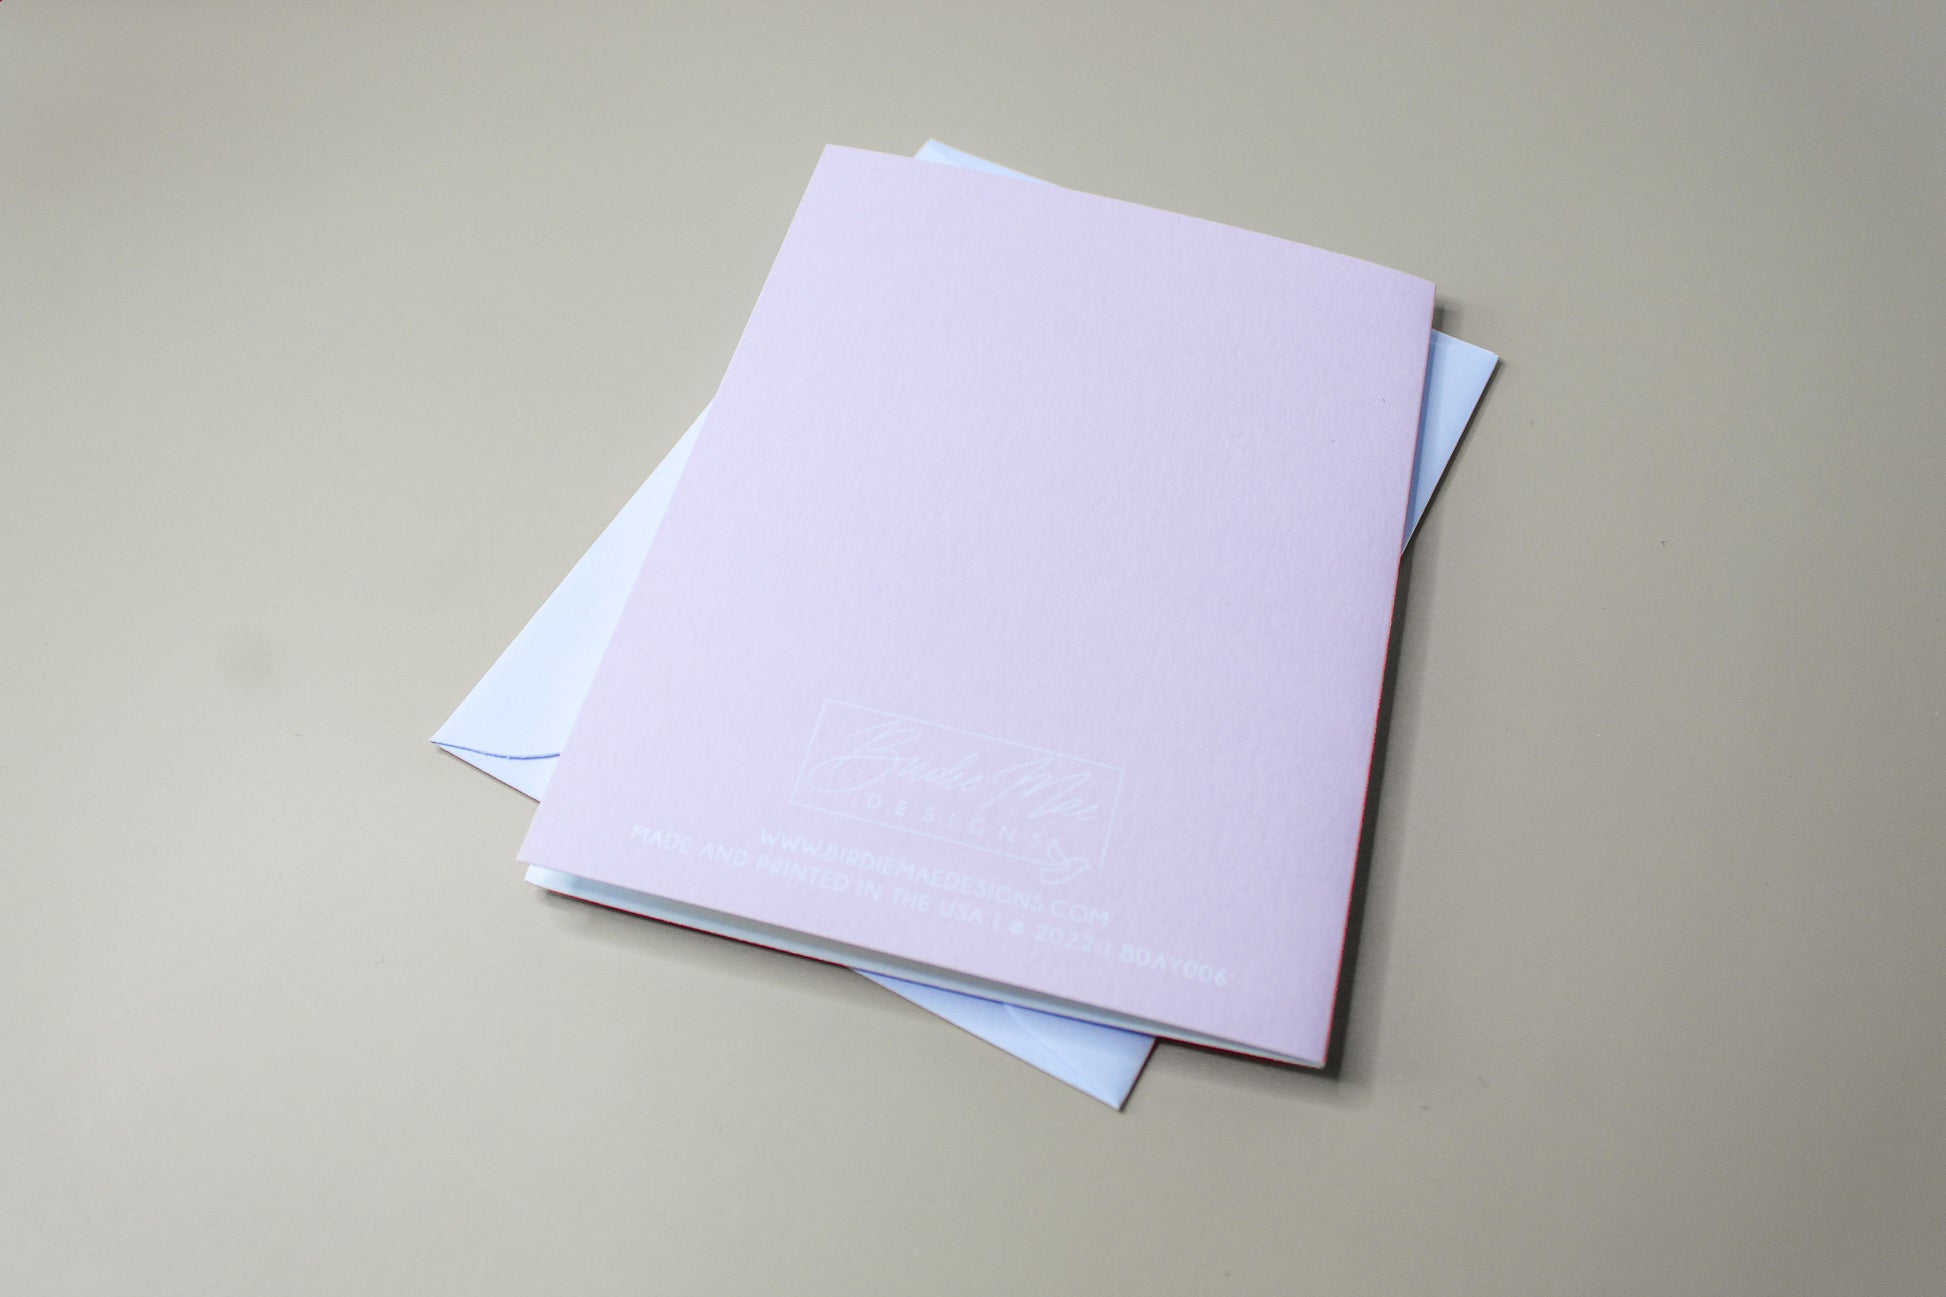 Our "Happy Birthday" card is too cute! Each card is folded to 4.25" tall by 5.5" wide, is blank inside and comes with a matching white envelope. Cards are packaged in cellophane sleeves.